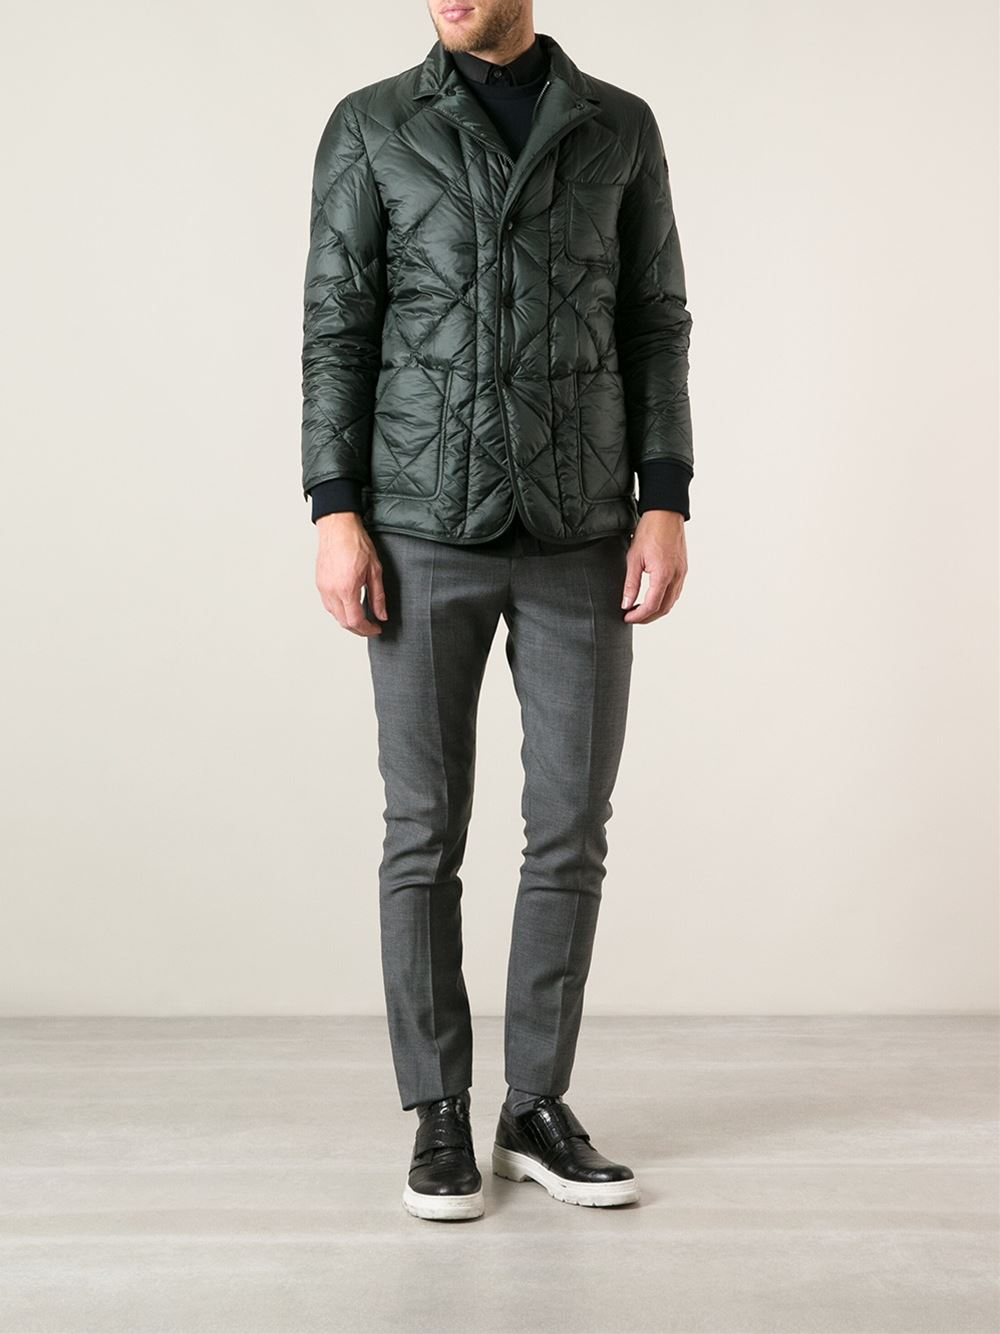 Moncler 'Norman' Padded Jacket in Green for Men | Lyst